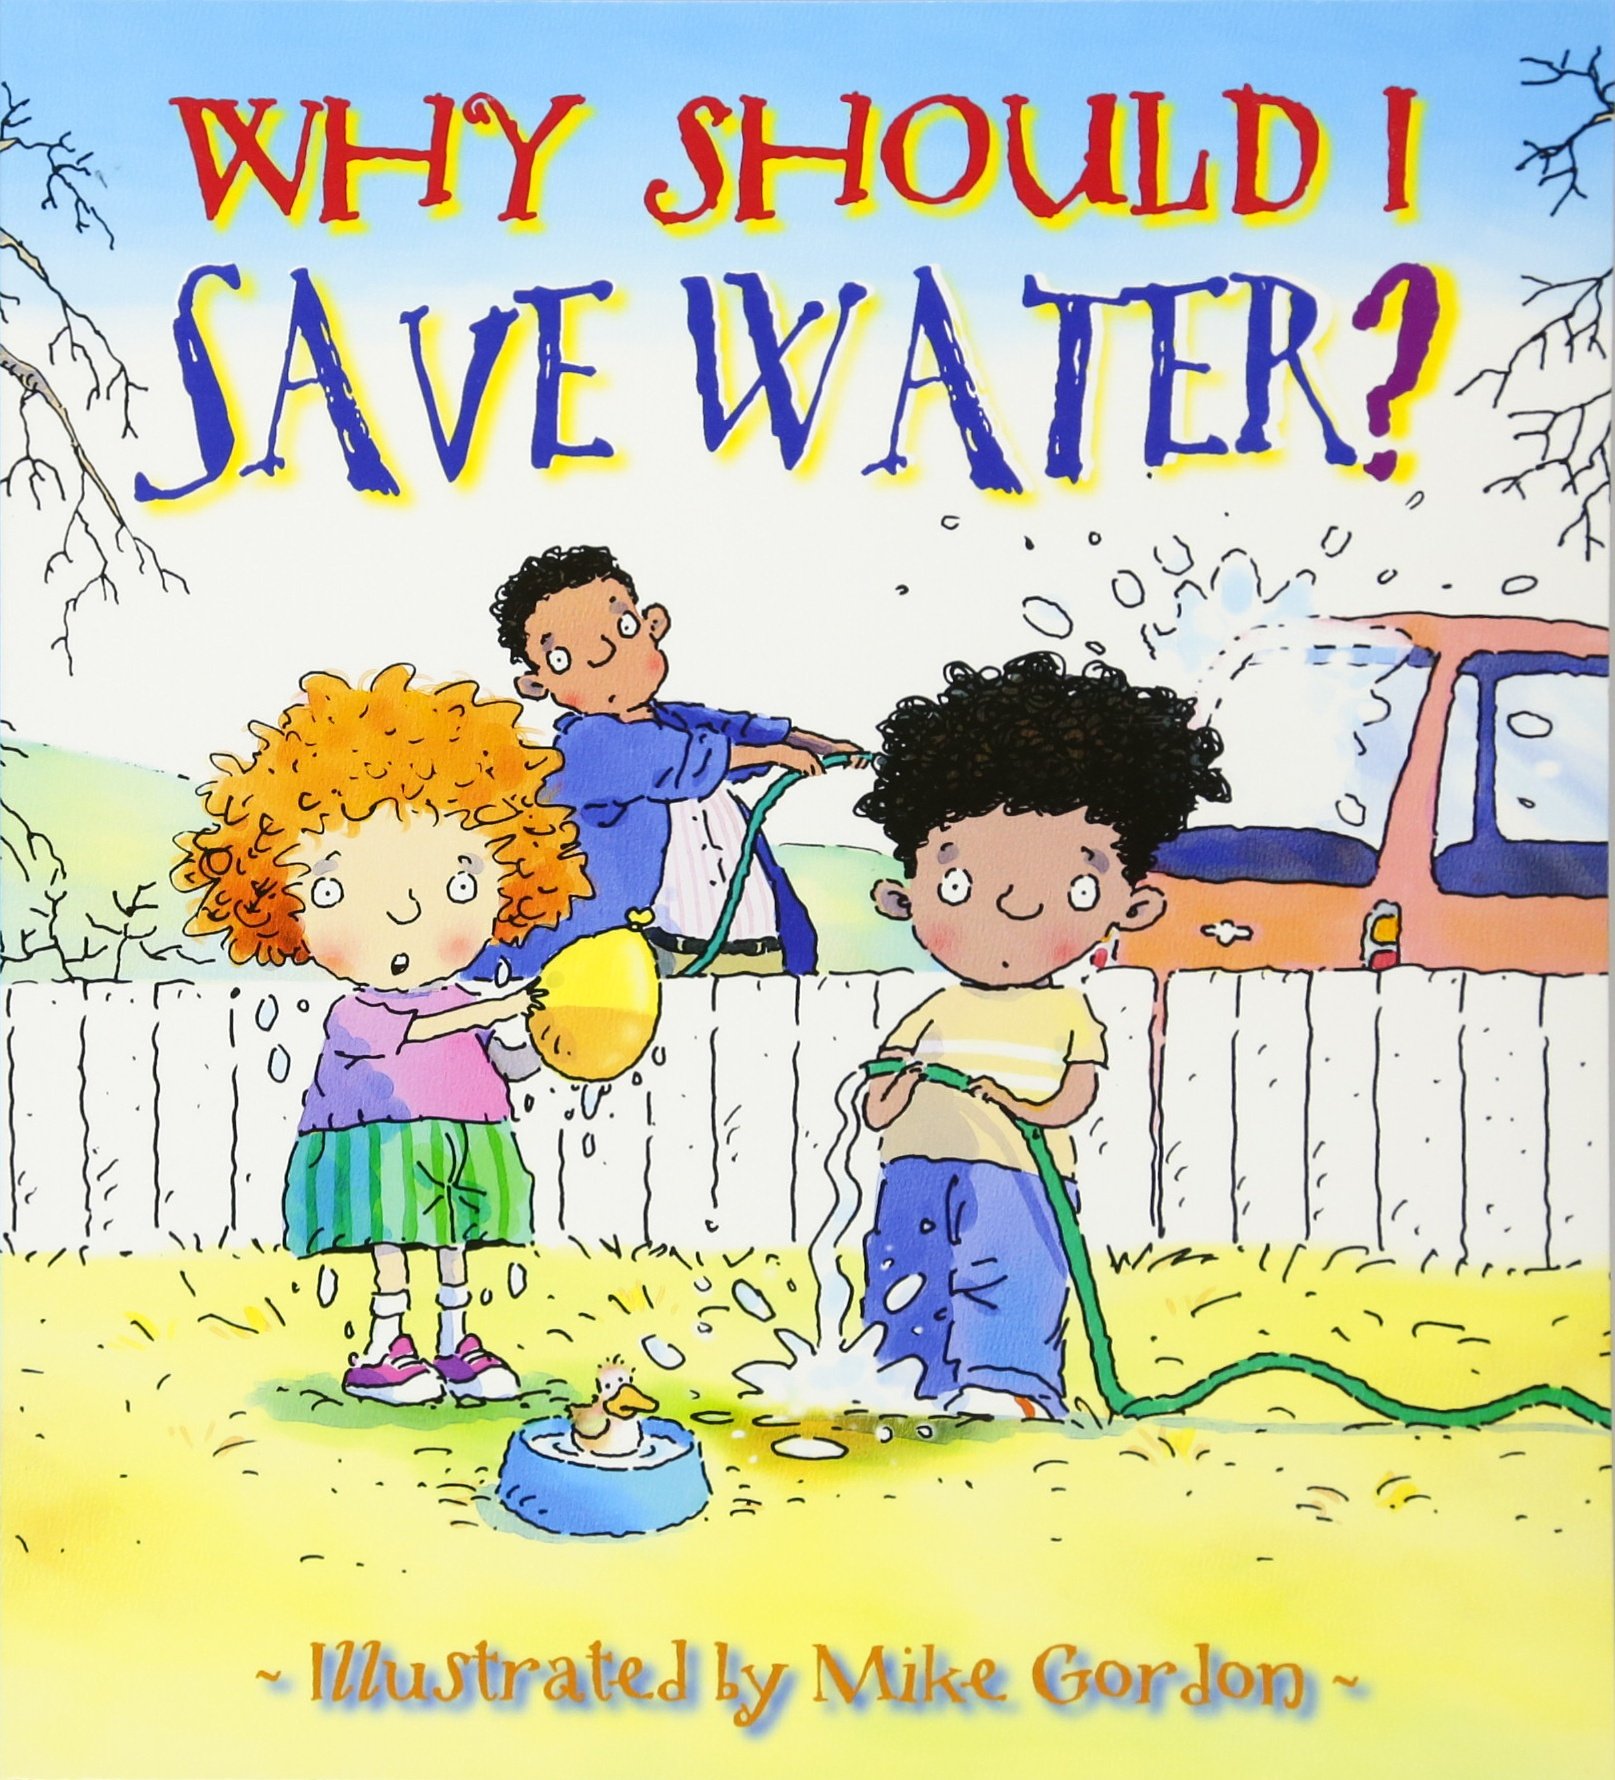 Why should I save water